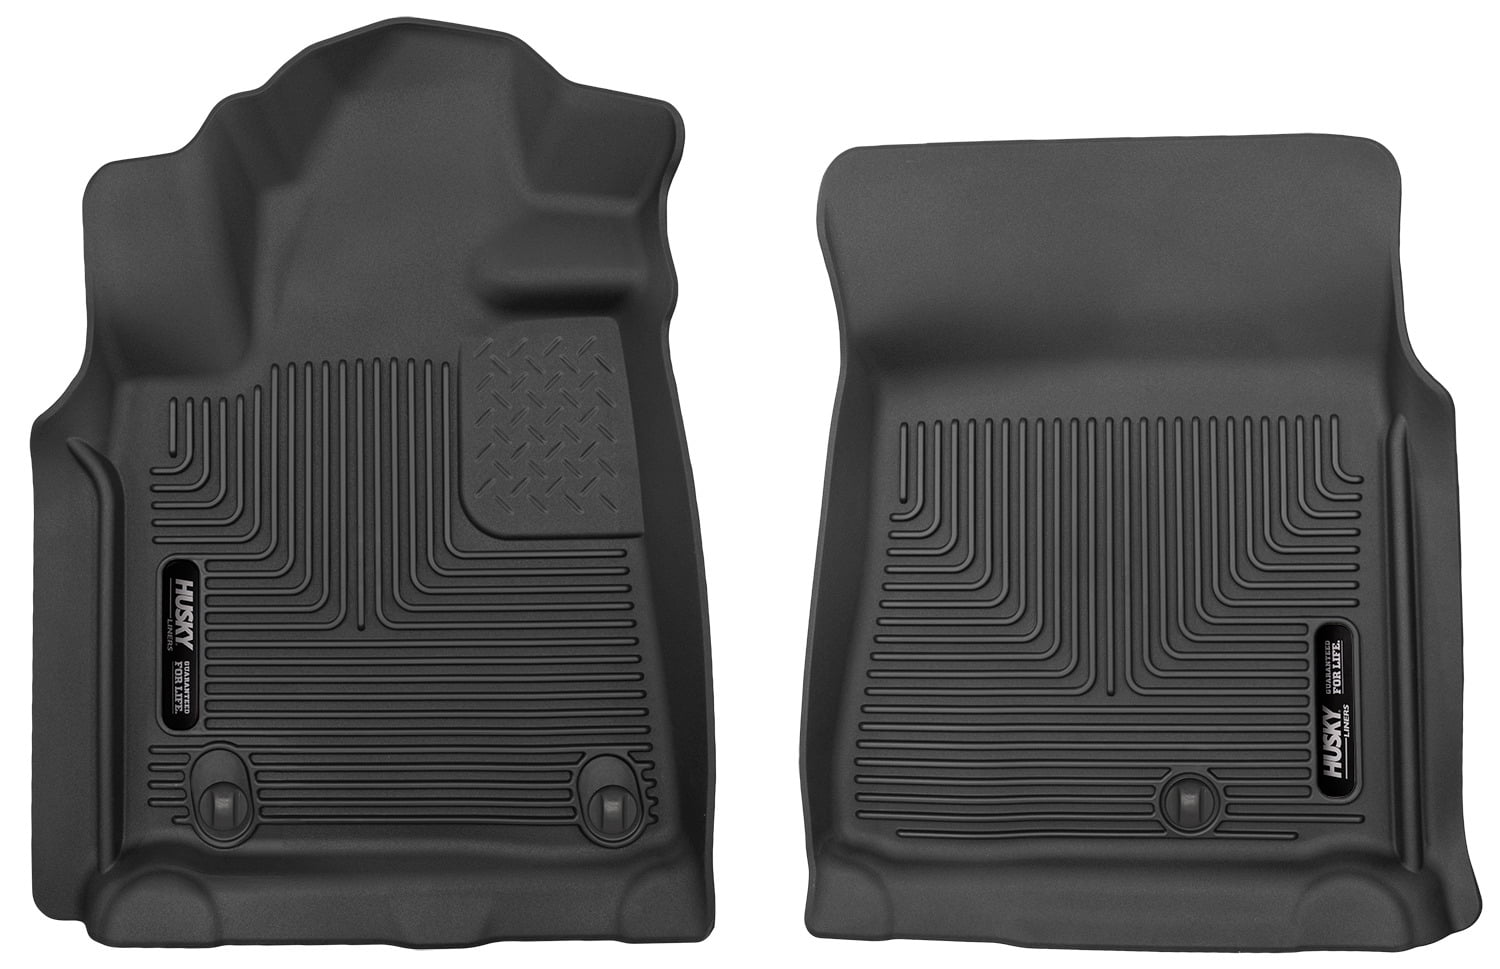 07-11 TUNDRA STD/EXT/CREW CAB FRONT FLOOR LINERS X-ACT CONTOUR SERIES BLACK